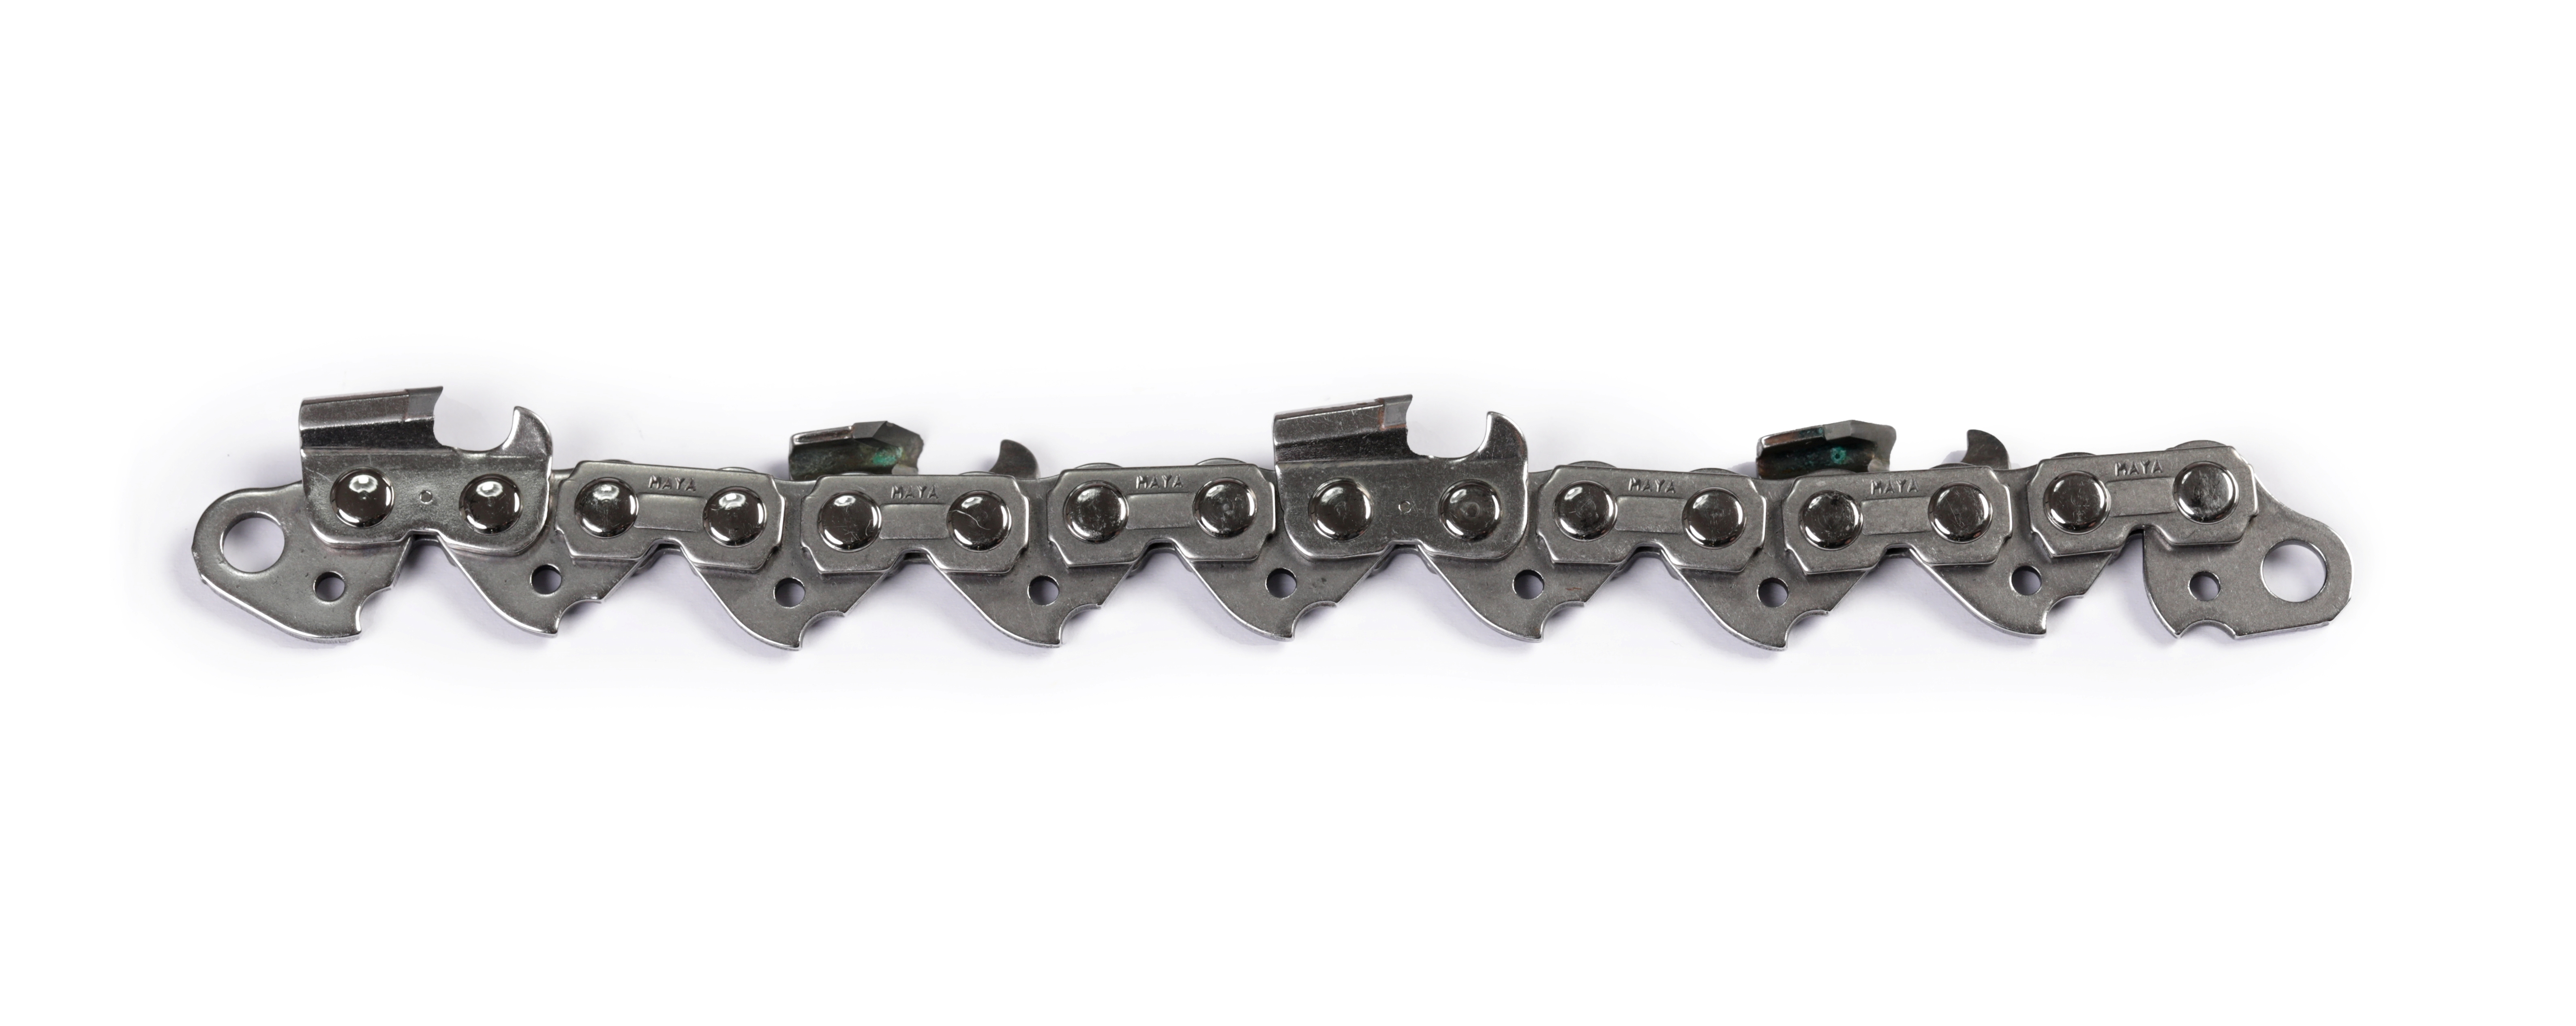 Professional Saw Chain supplier